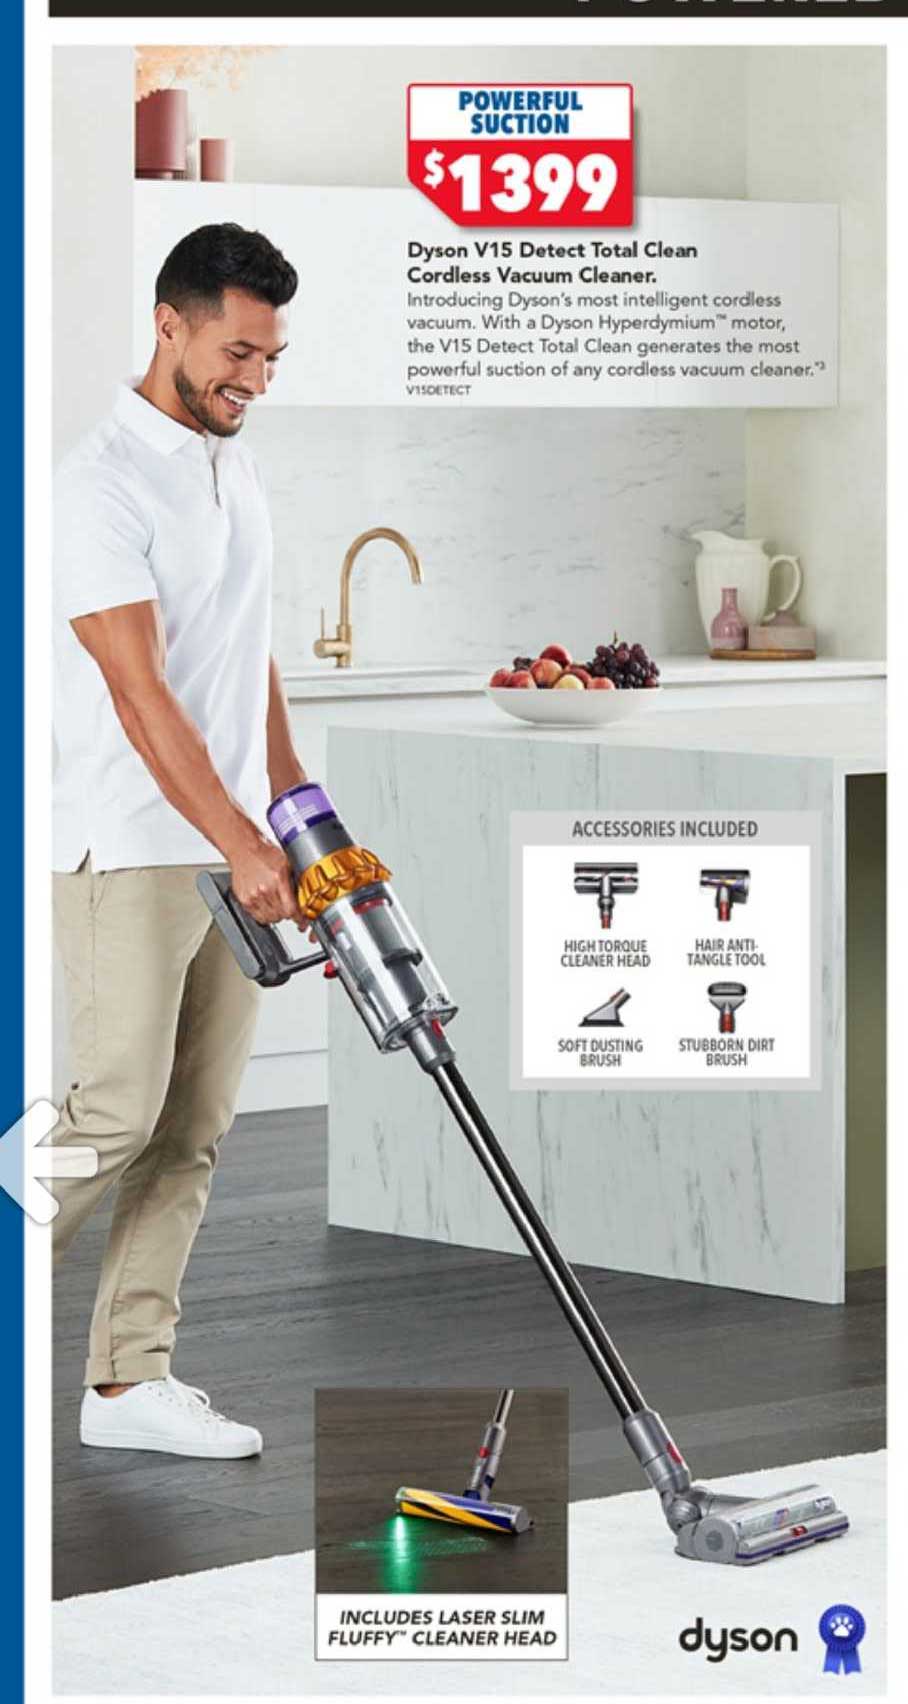 Harvey Norman Dyson V15 Detect Total Clean Cordless Vacuum Cleaner